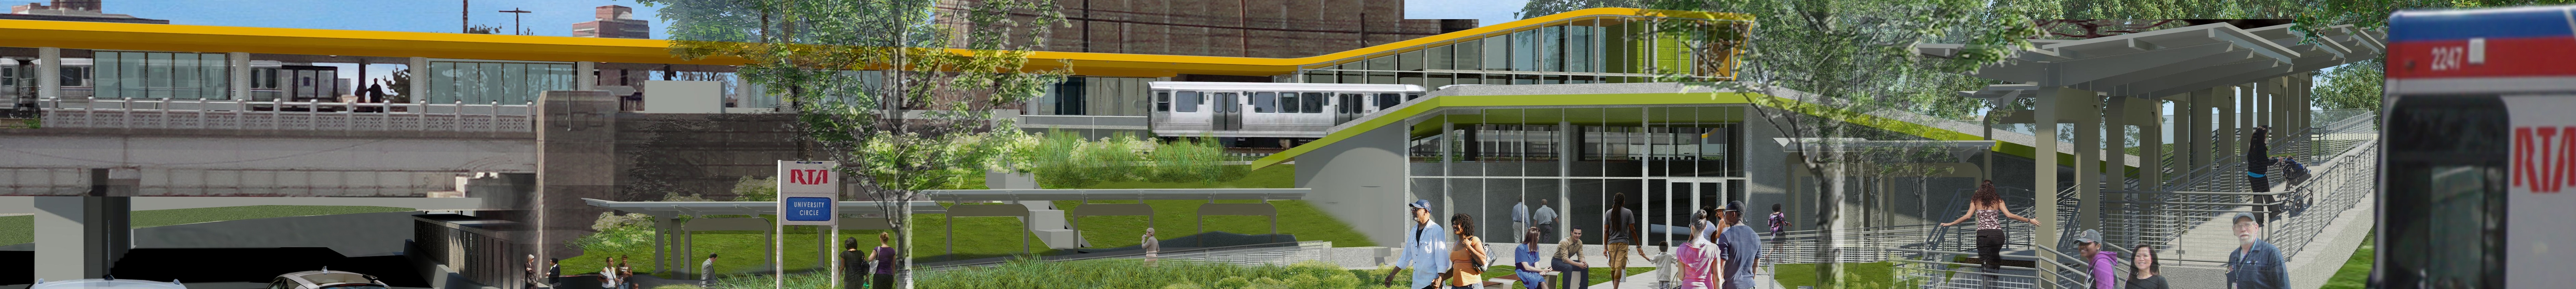 A rendering of the new Cedar-University station